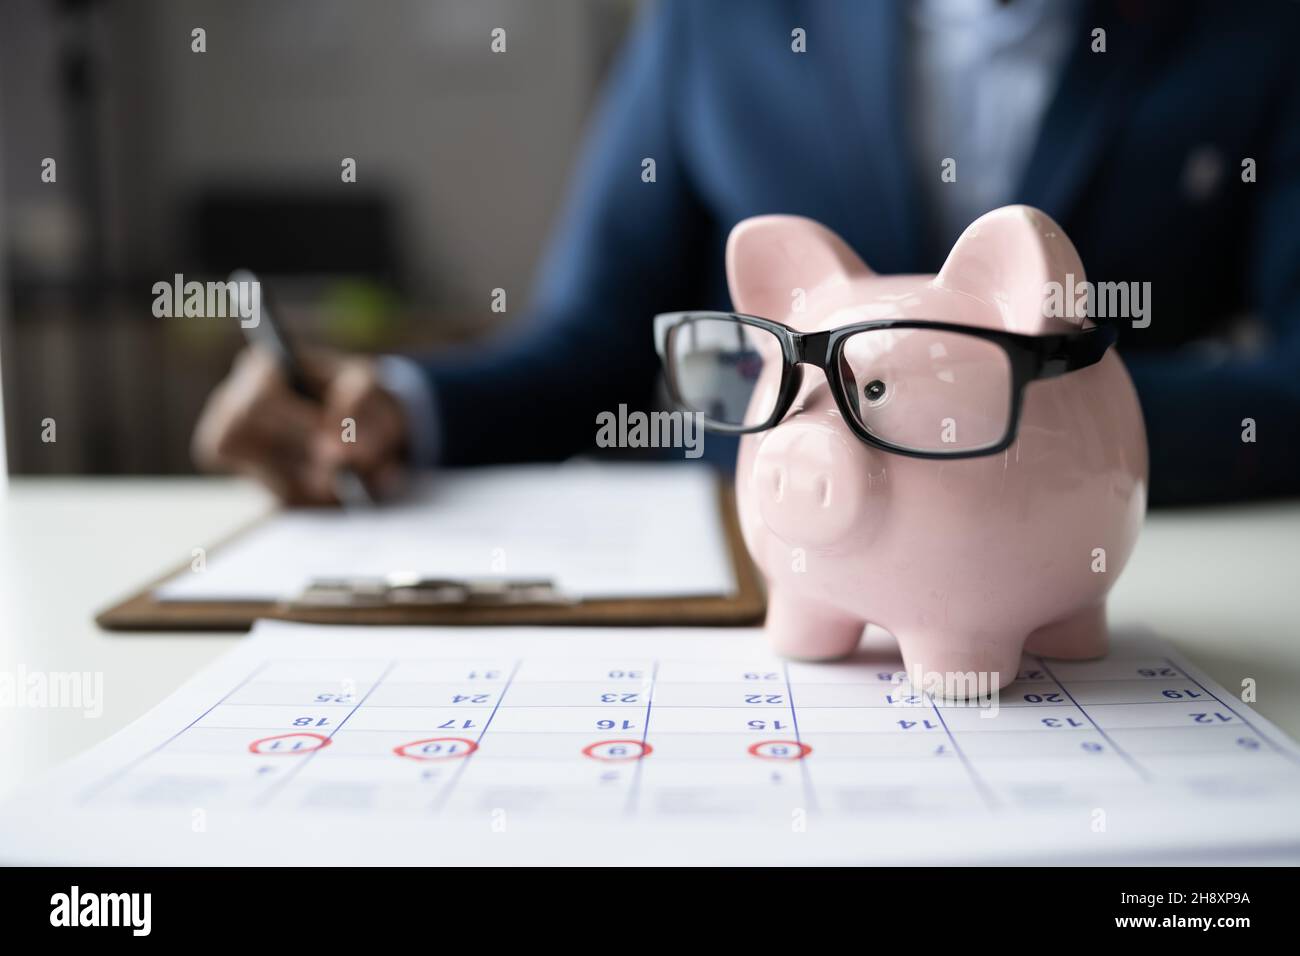 Piggybank Money Investment Schedule And Business Budget Stock Photo